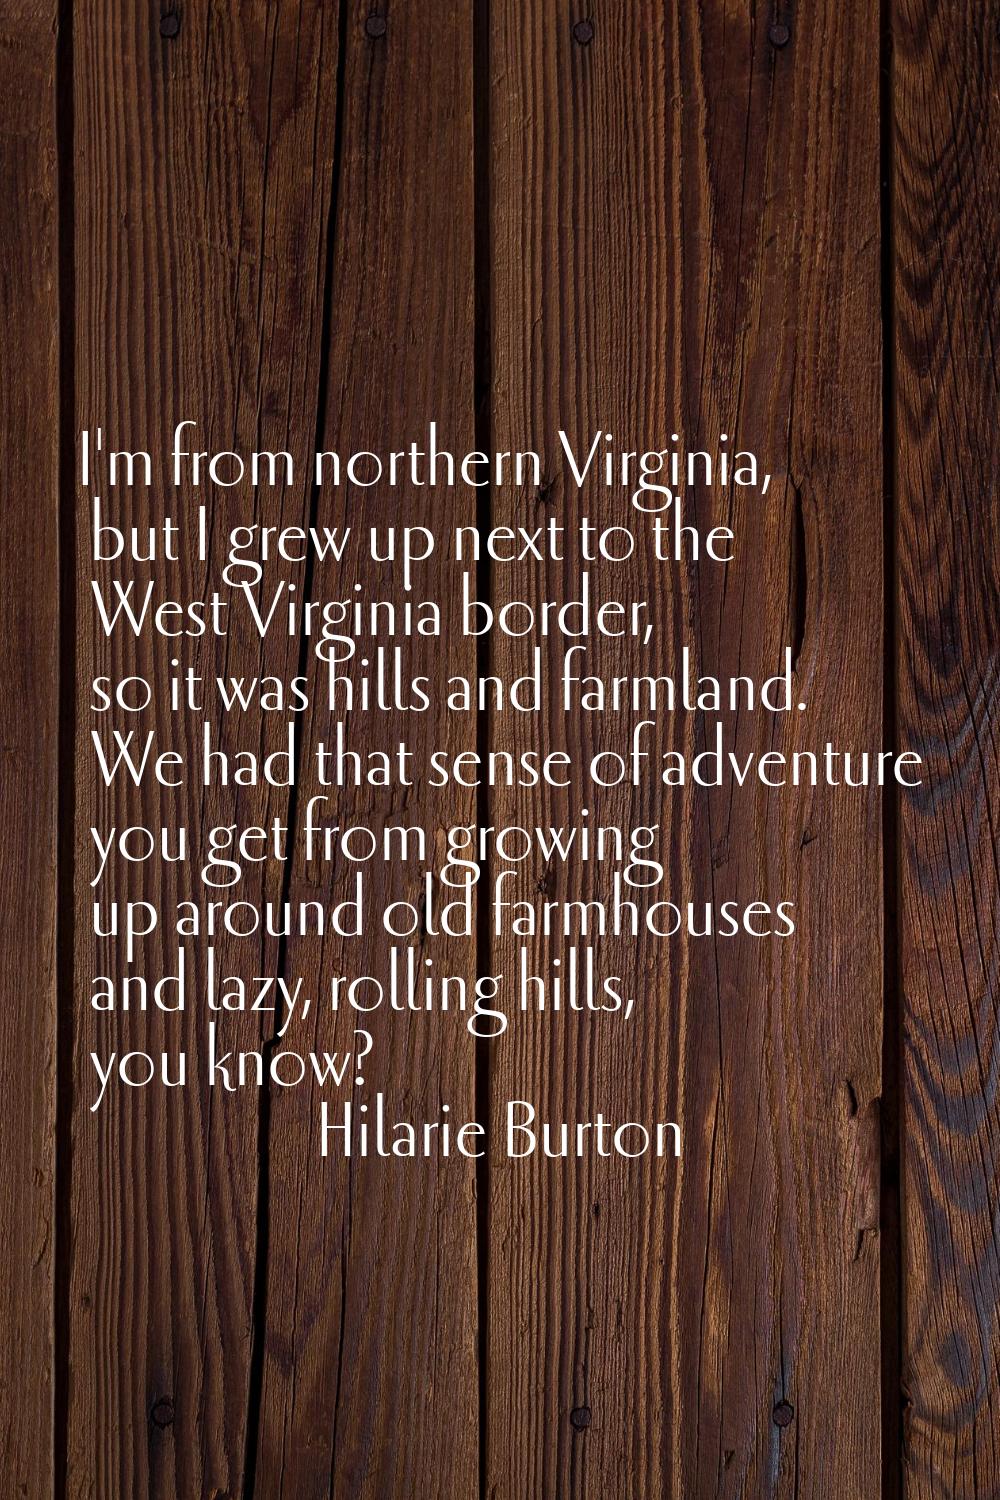 I'm from northern Virginia, but I grew up next to the West Virginia border, so it was hills and far